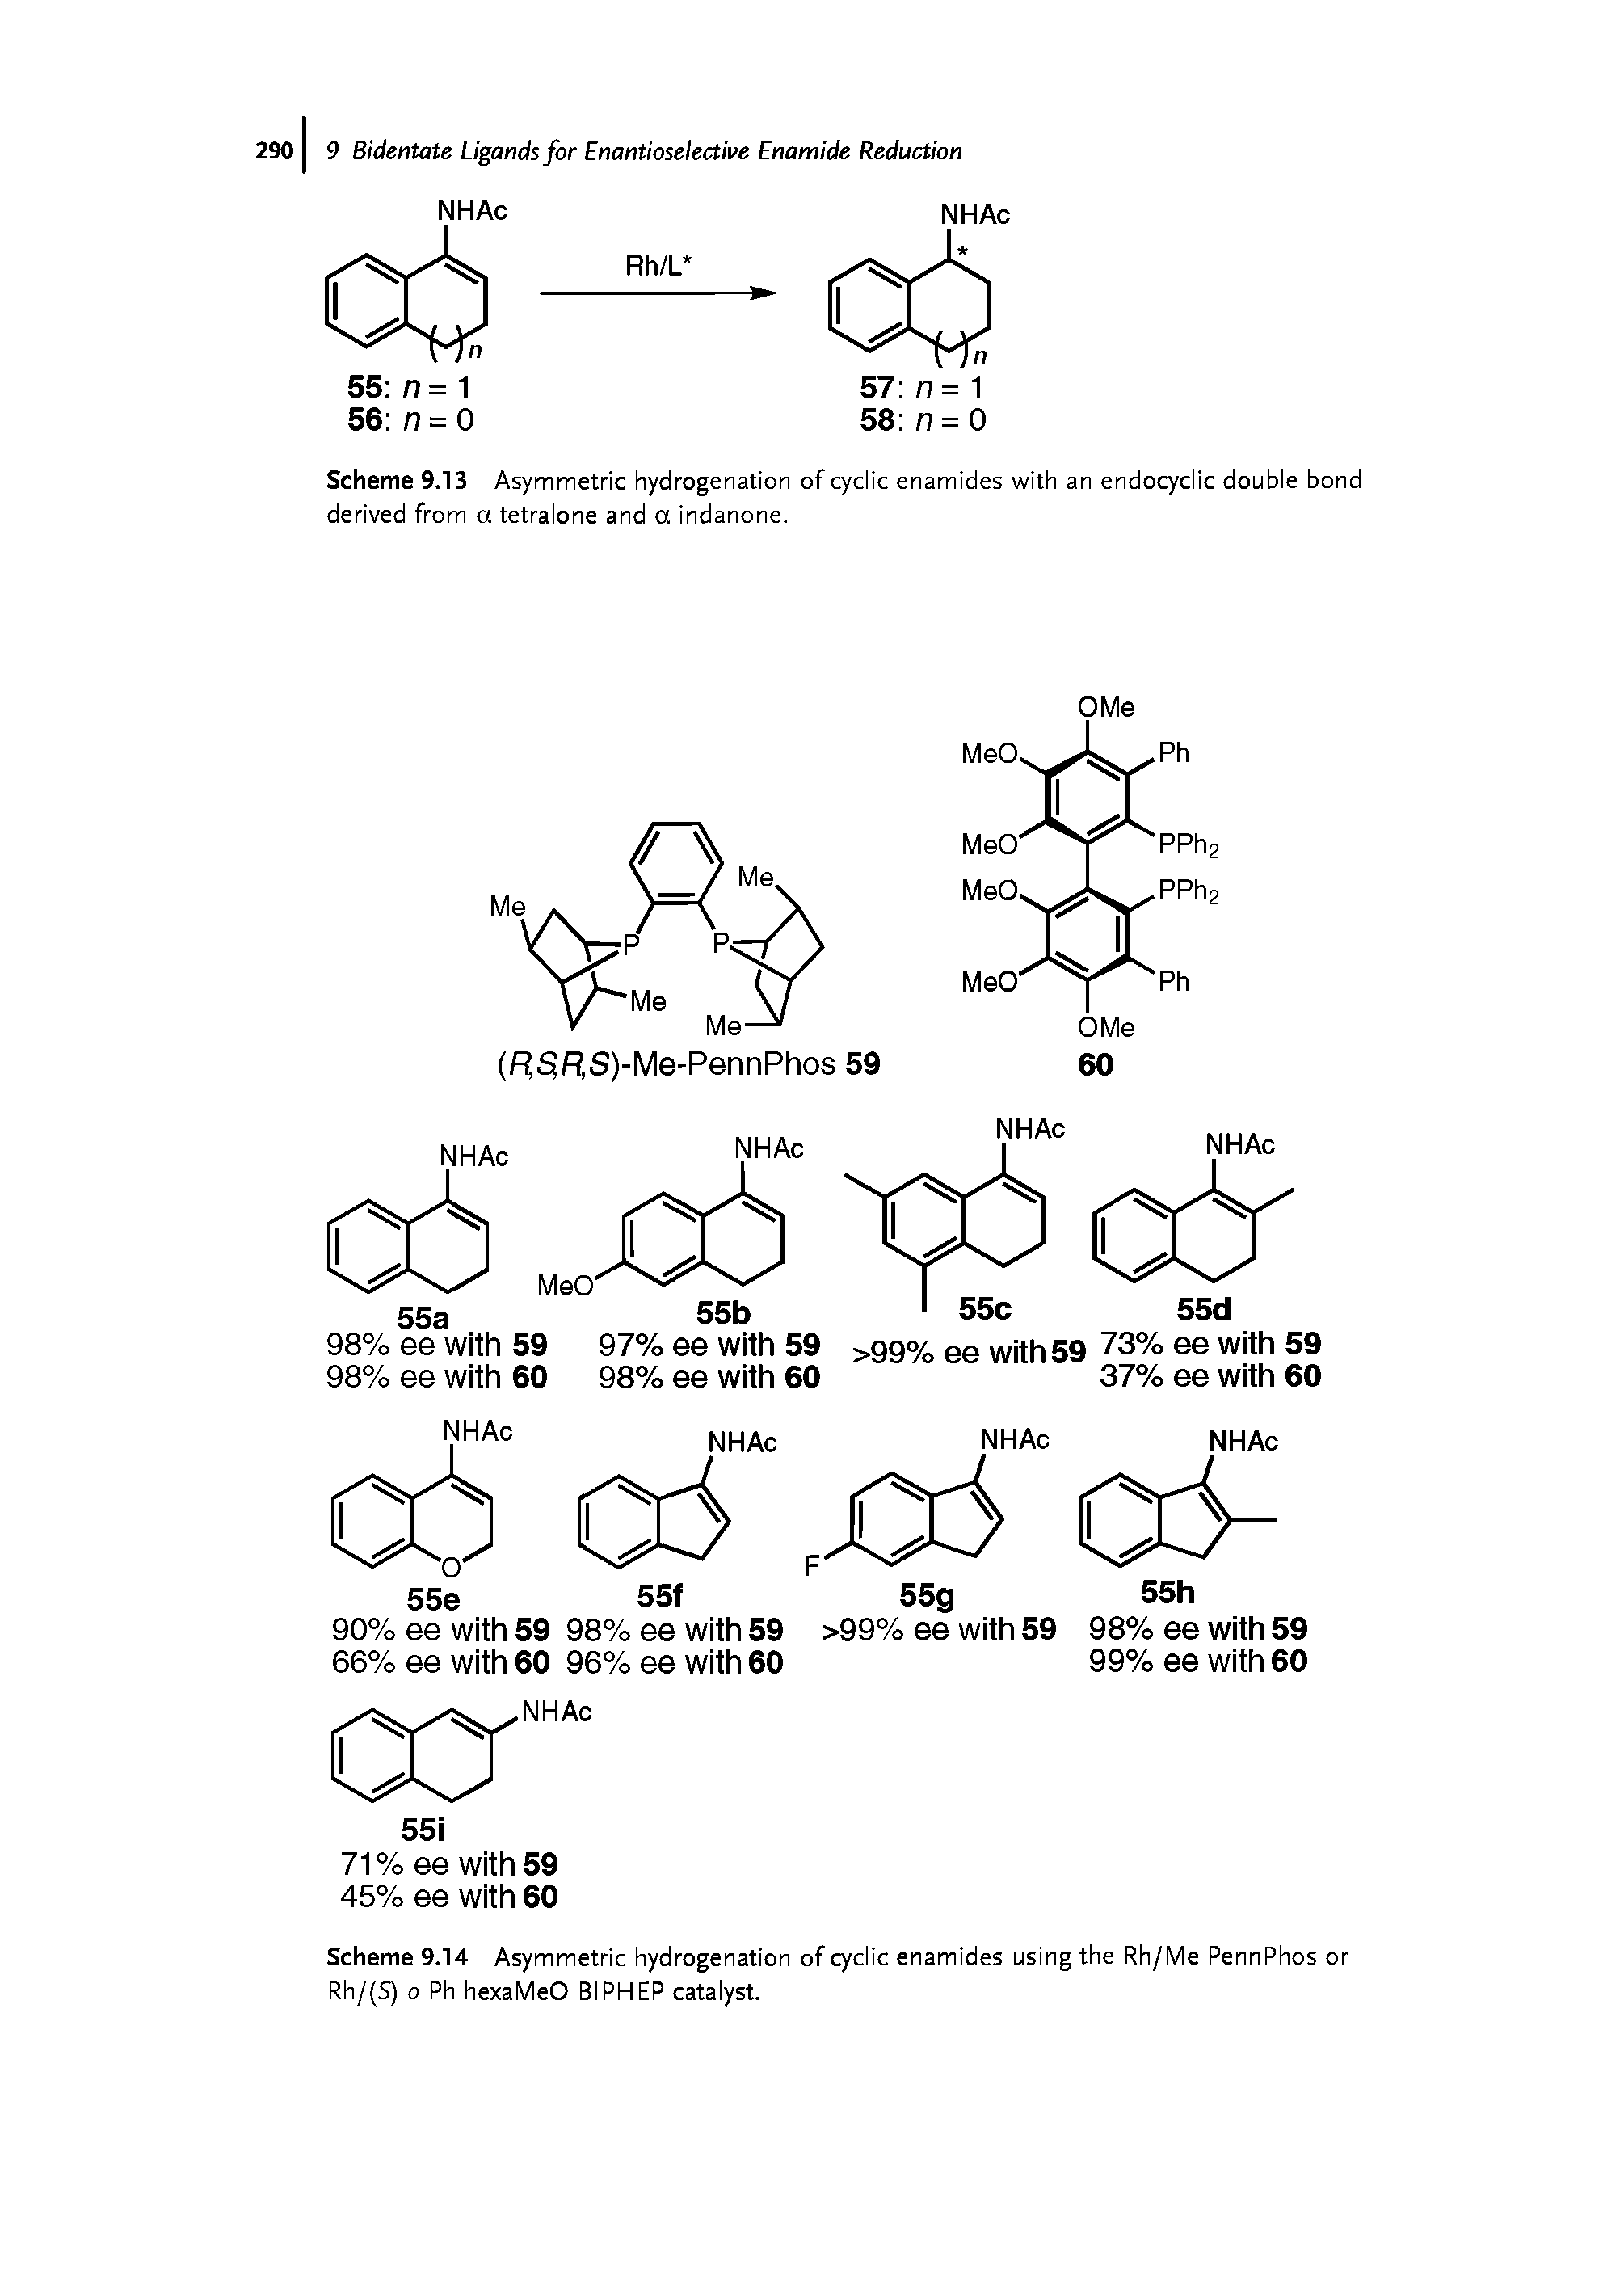 Scheme 9.13 Asymmetric hydrogenation of cyclic enamides with an endocyclic double bond derived from a tetralone and a indanone.